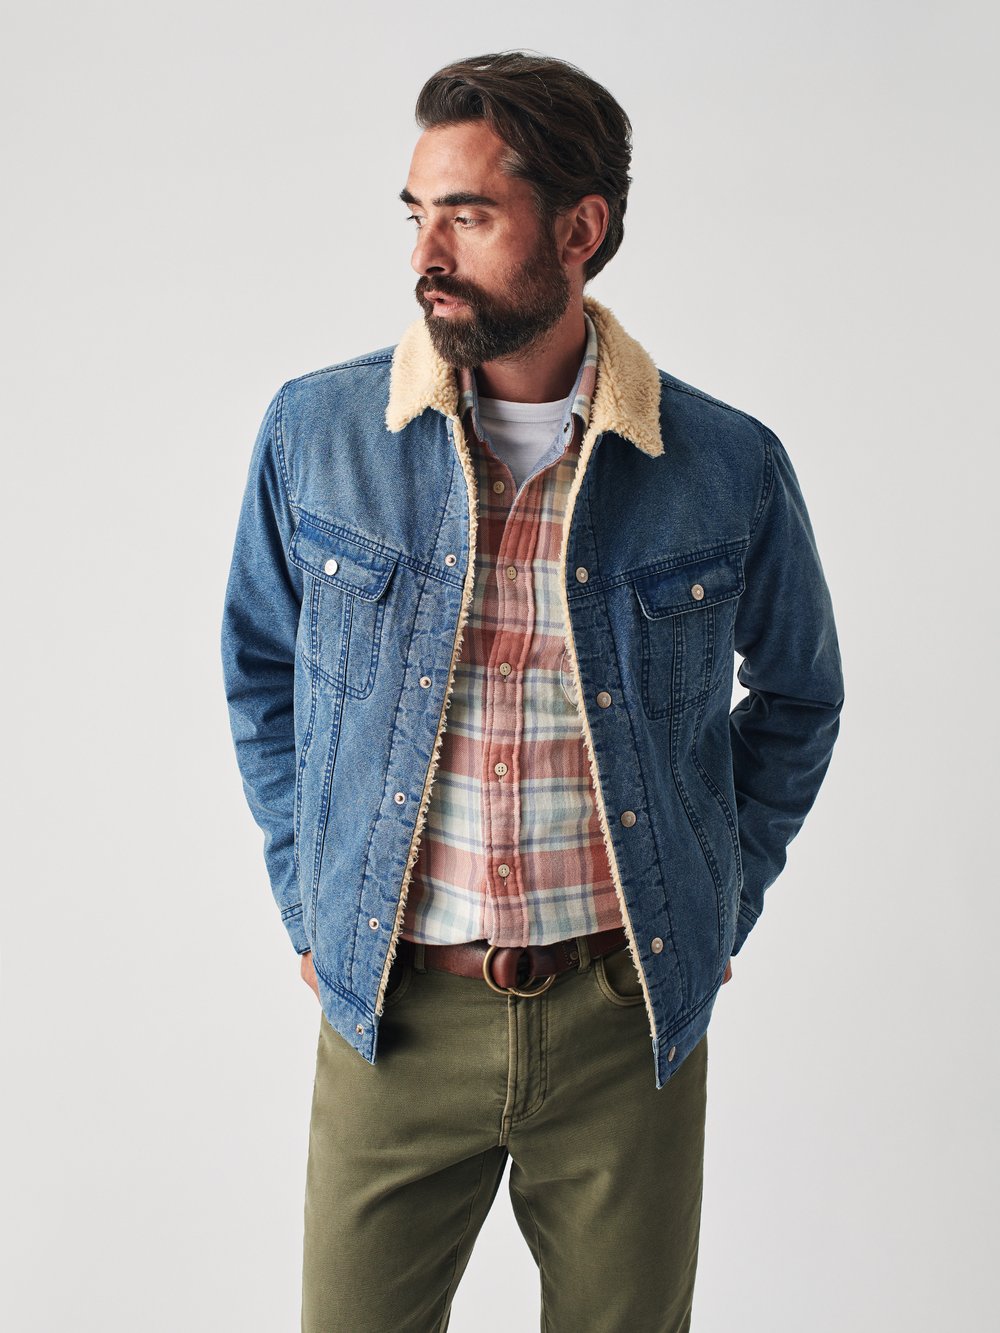 NUVO’s Menswear Guide October 2021: Ethical Fashion | NUVO